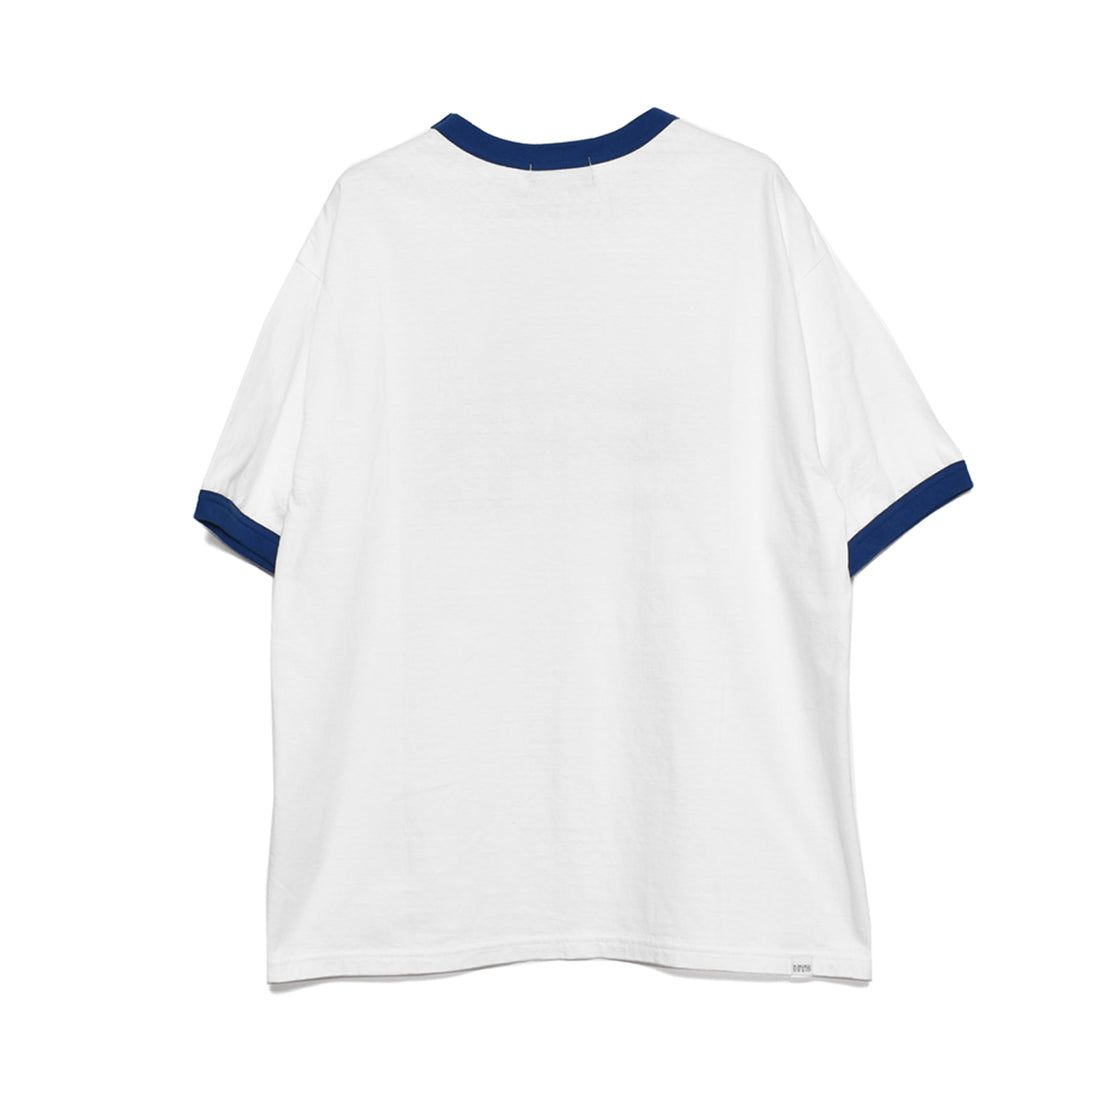 [HYSTERIC GLAMOUR]UNTAMED YOUTH Tシャツ/WHITE×BLUE(02231CT17)